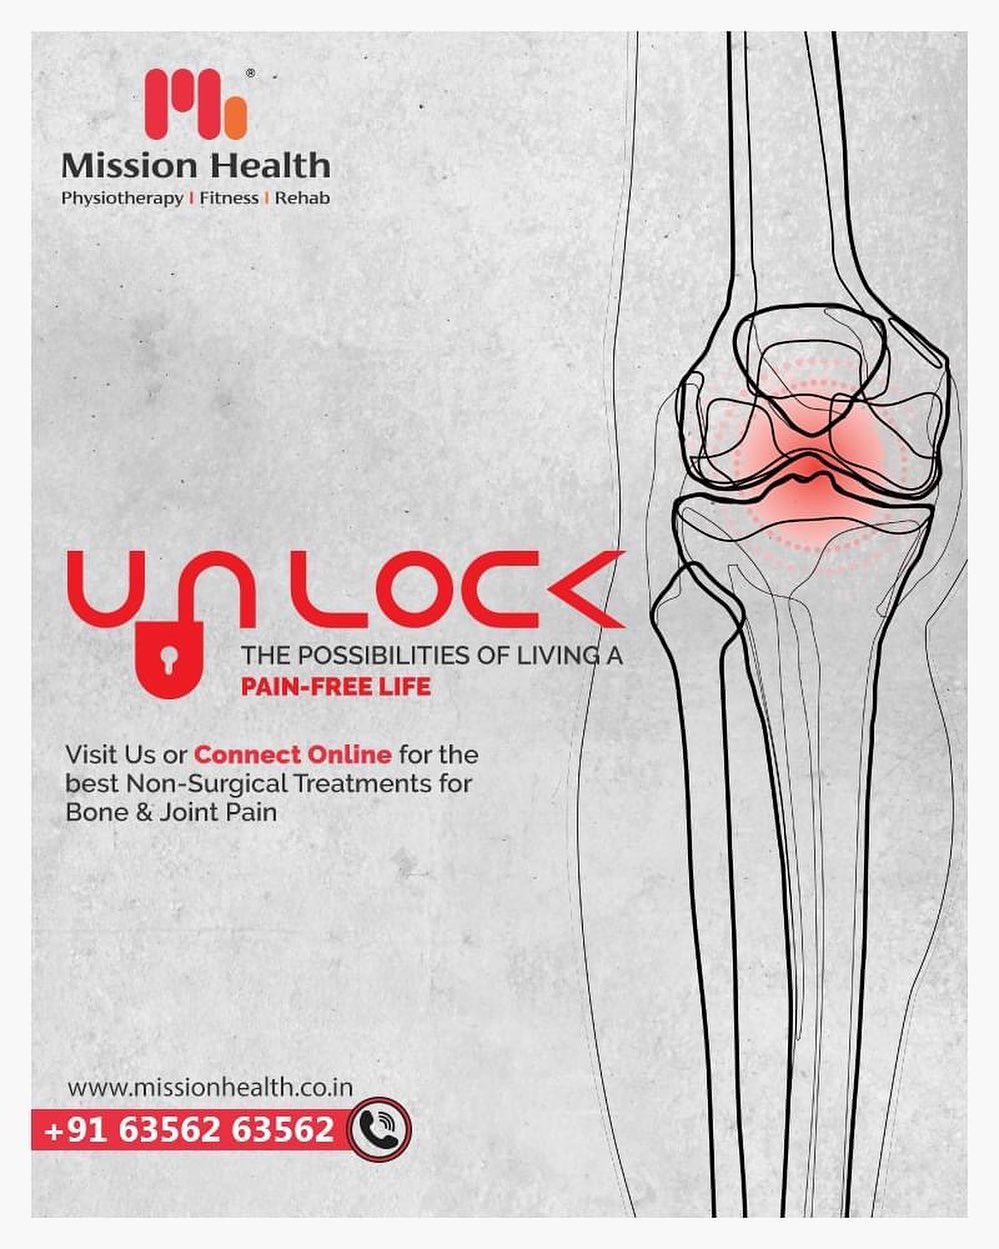 #Unlock the Possibilities of living a Pain-Free Life
Visit Us or Connect Online for the best Non-Surgical Treatments for Bone & Joint Pain

Mission Health is Asia's First and Only super-specialty Bone & Joint care clinic to bring in the latest technology and treatment from the various parts of the world.

Visit us with all your past reports or connect us for online-consultation, we are just a 